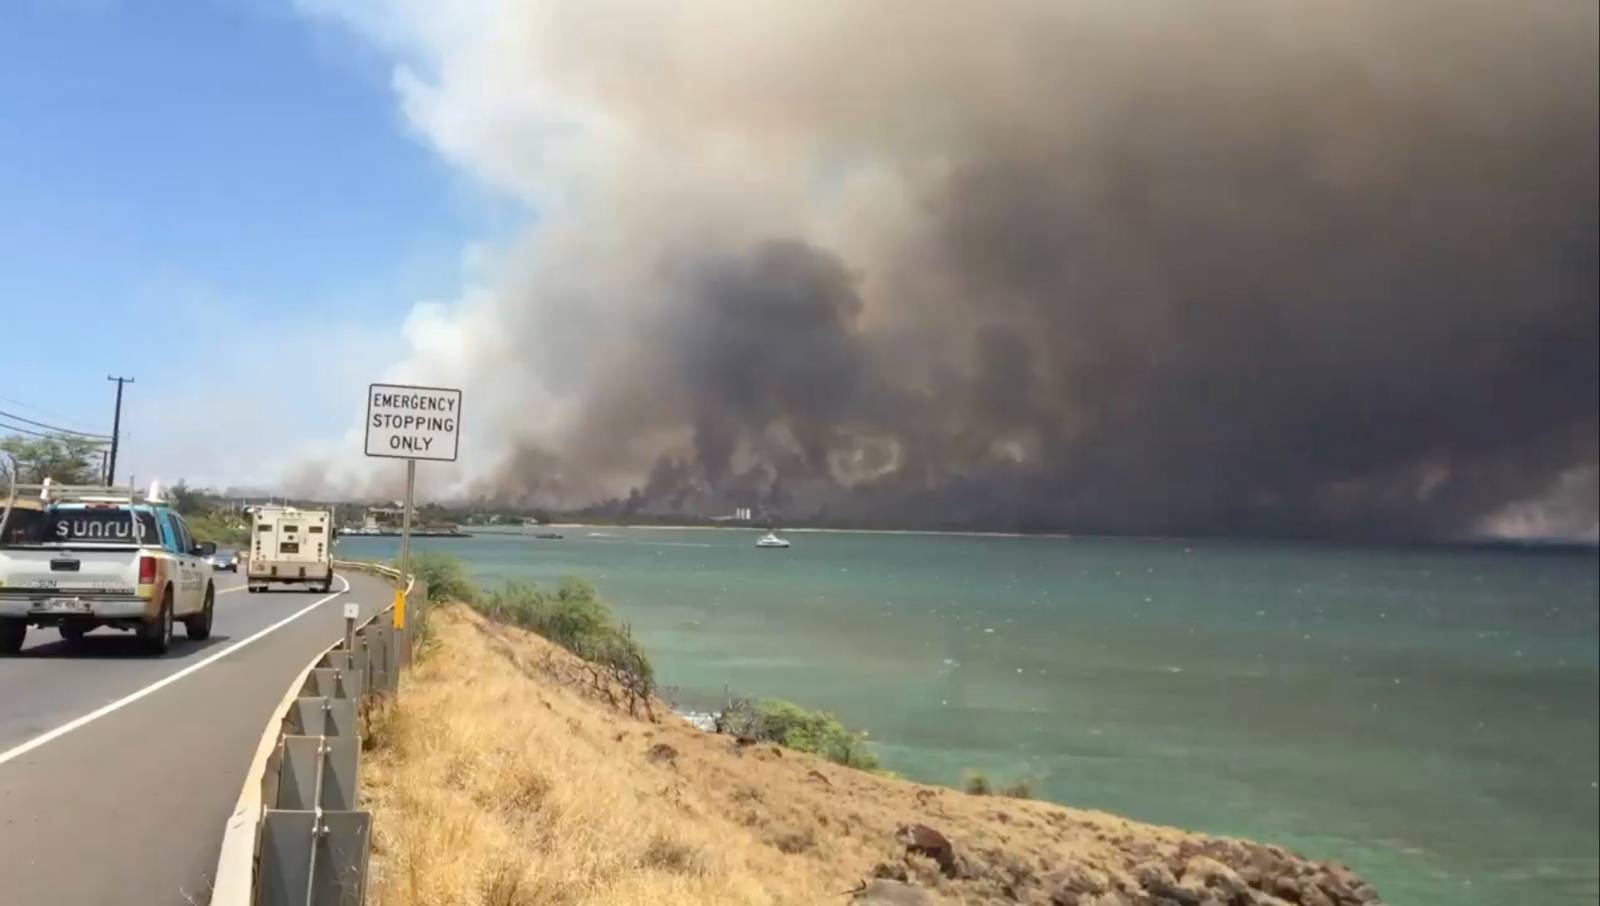 A plume of smoke spreads across the sky during a wildfire in Kihei, as vehicles move along a road in Maui